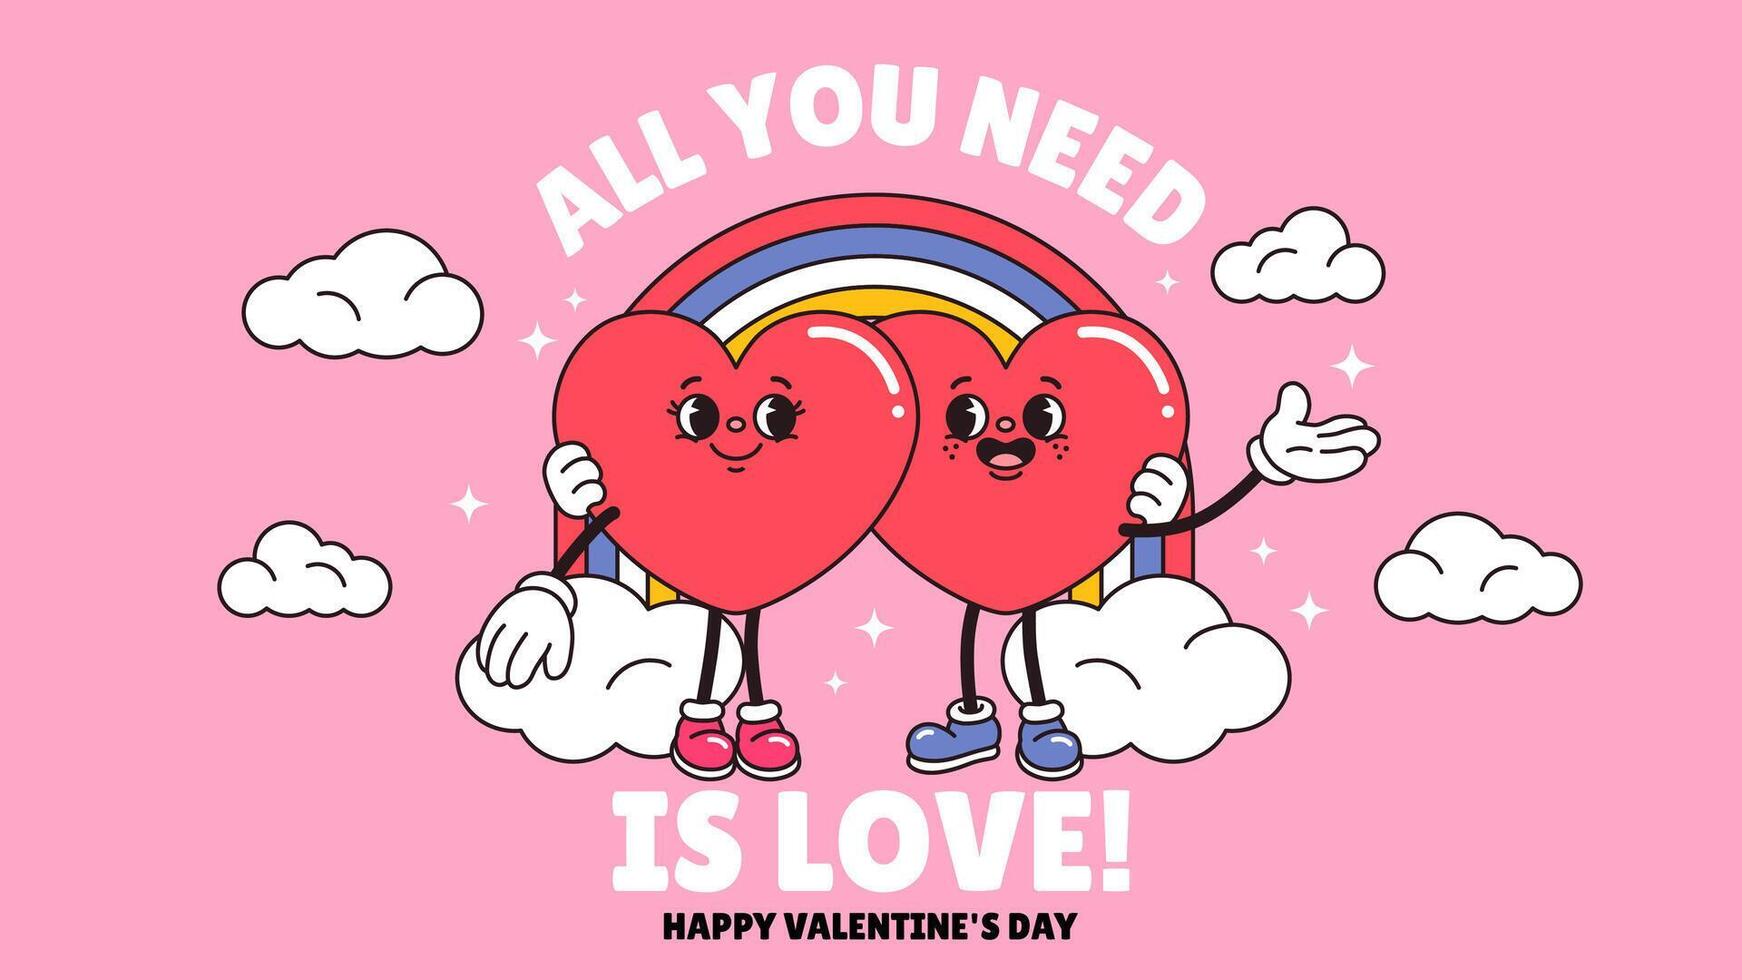 All you need is Love, Happy valentine's day Typography poster. Hippie 60s 70s retro style. Y2K aesthetic. Cartoon heart character couple embracing banner, Background. Groovy template, Greeting card. vector